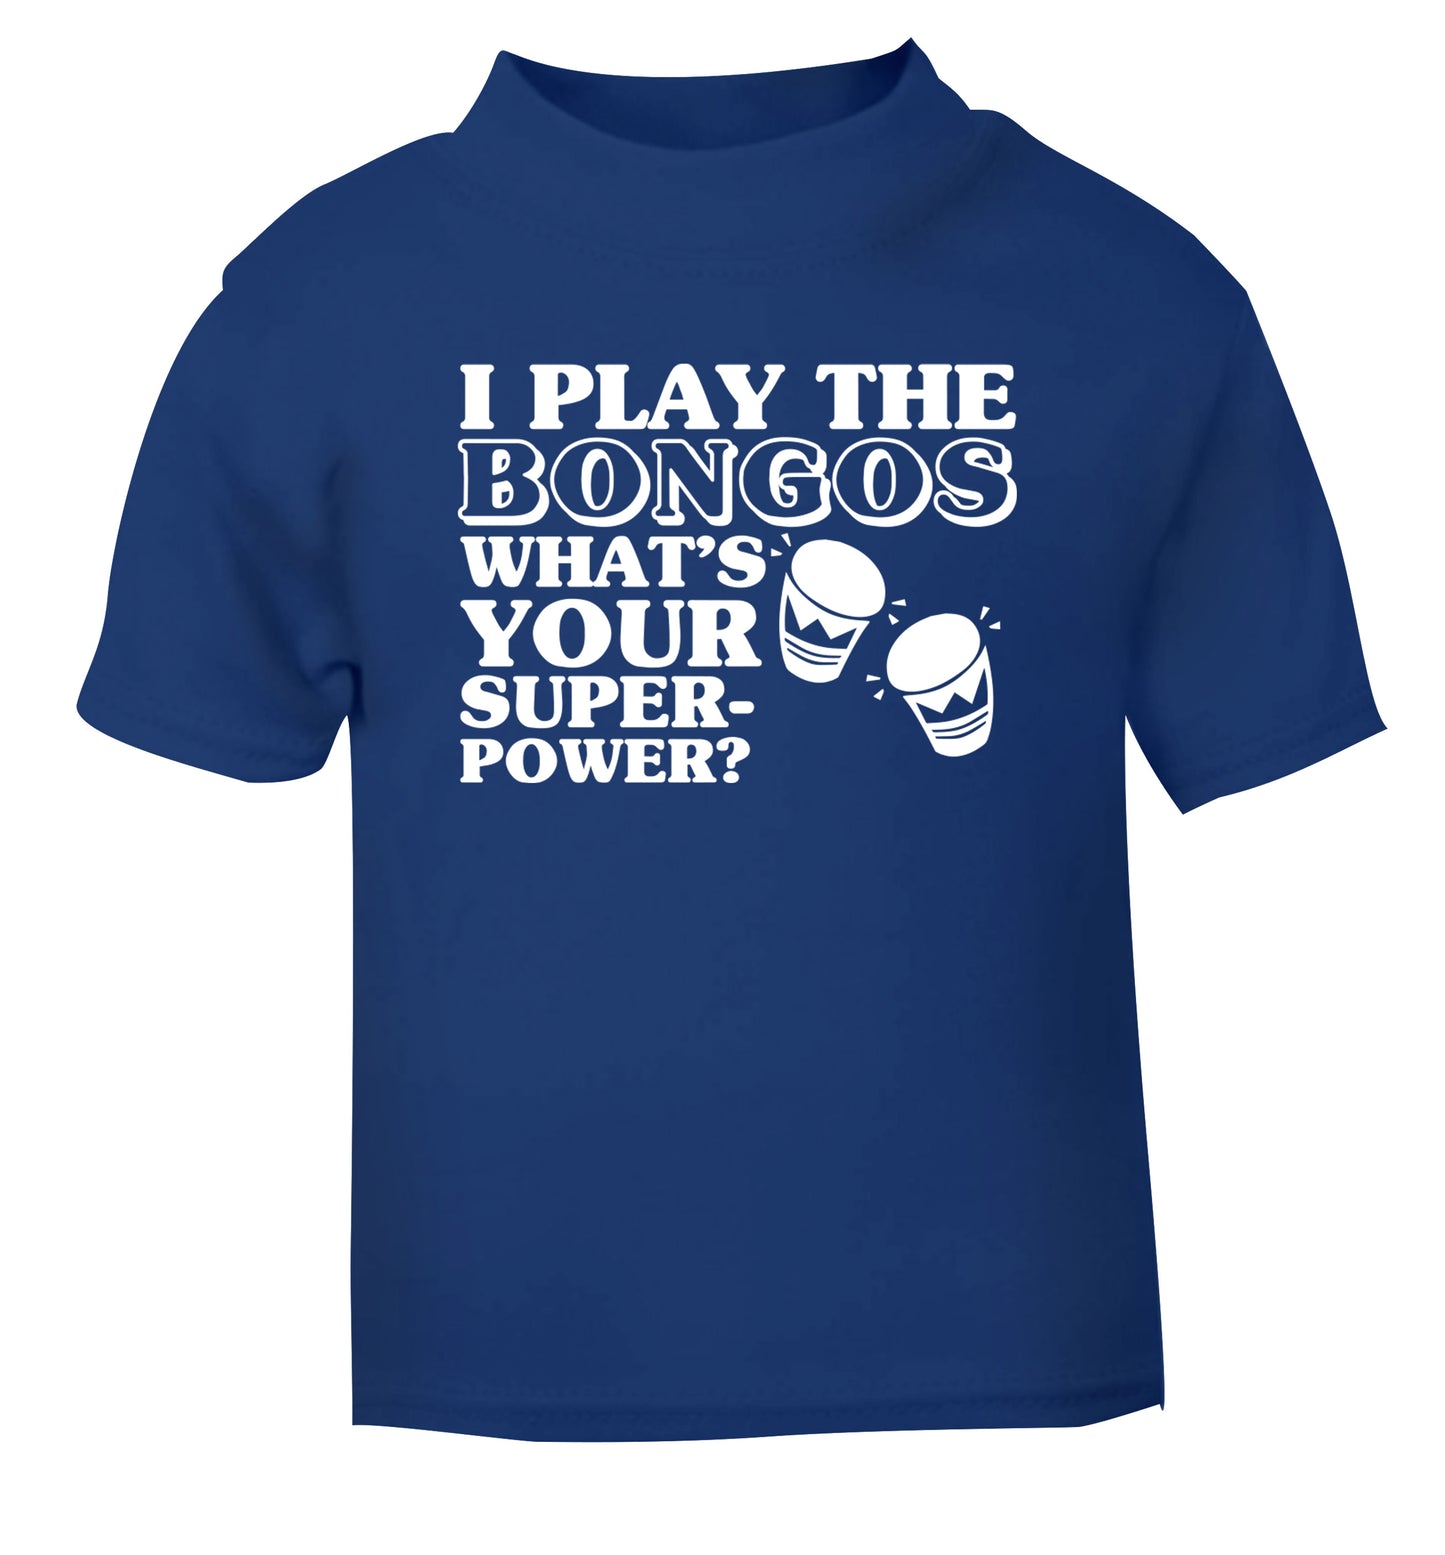 I play the bongos what's your superpower? blue Baby Toddler Tshirt 2 Years